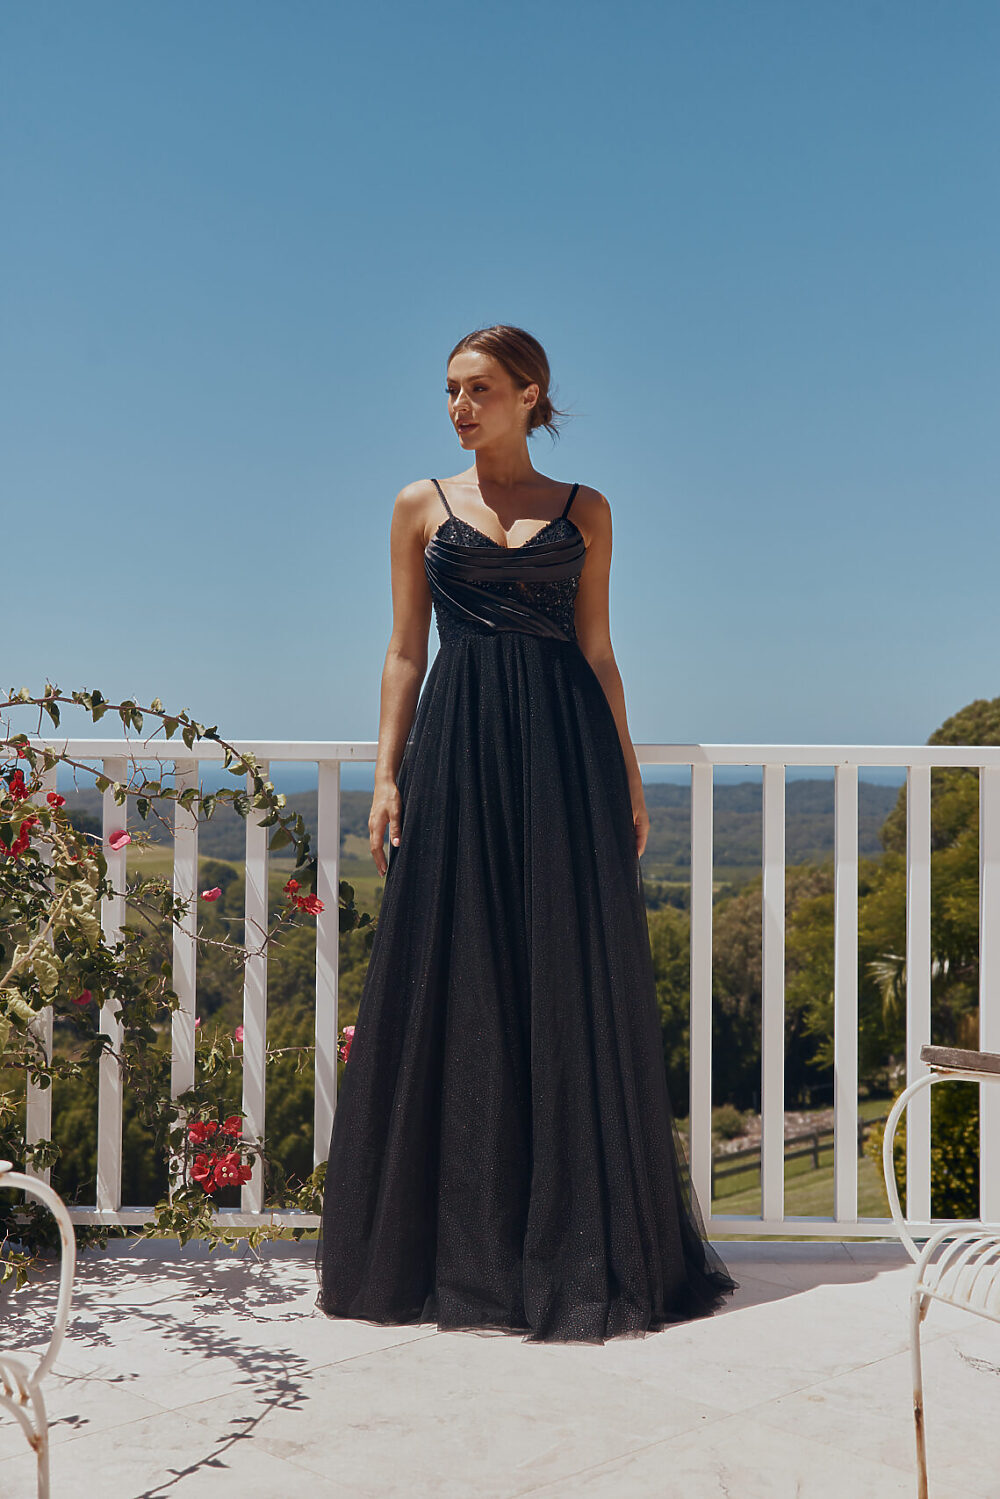 Ladina PO2308 Mystique Collection dress by Tania Olsen Designs